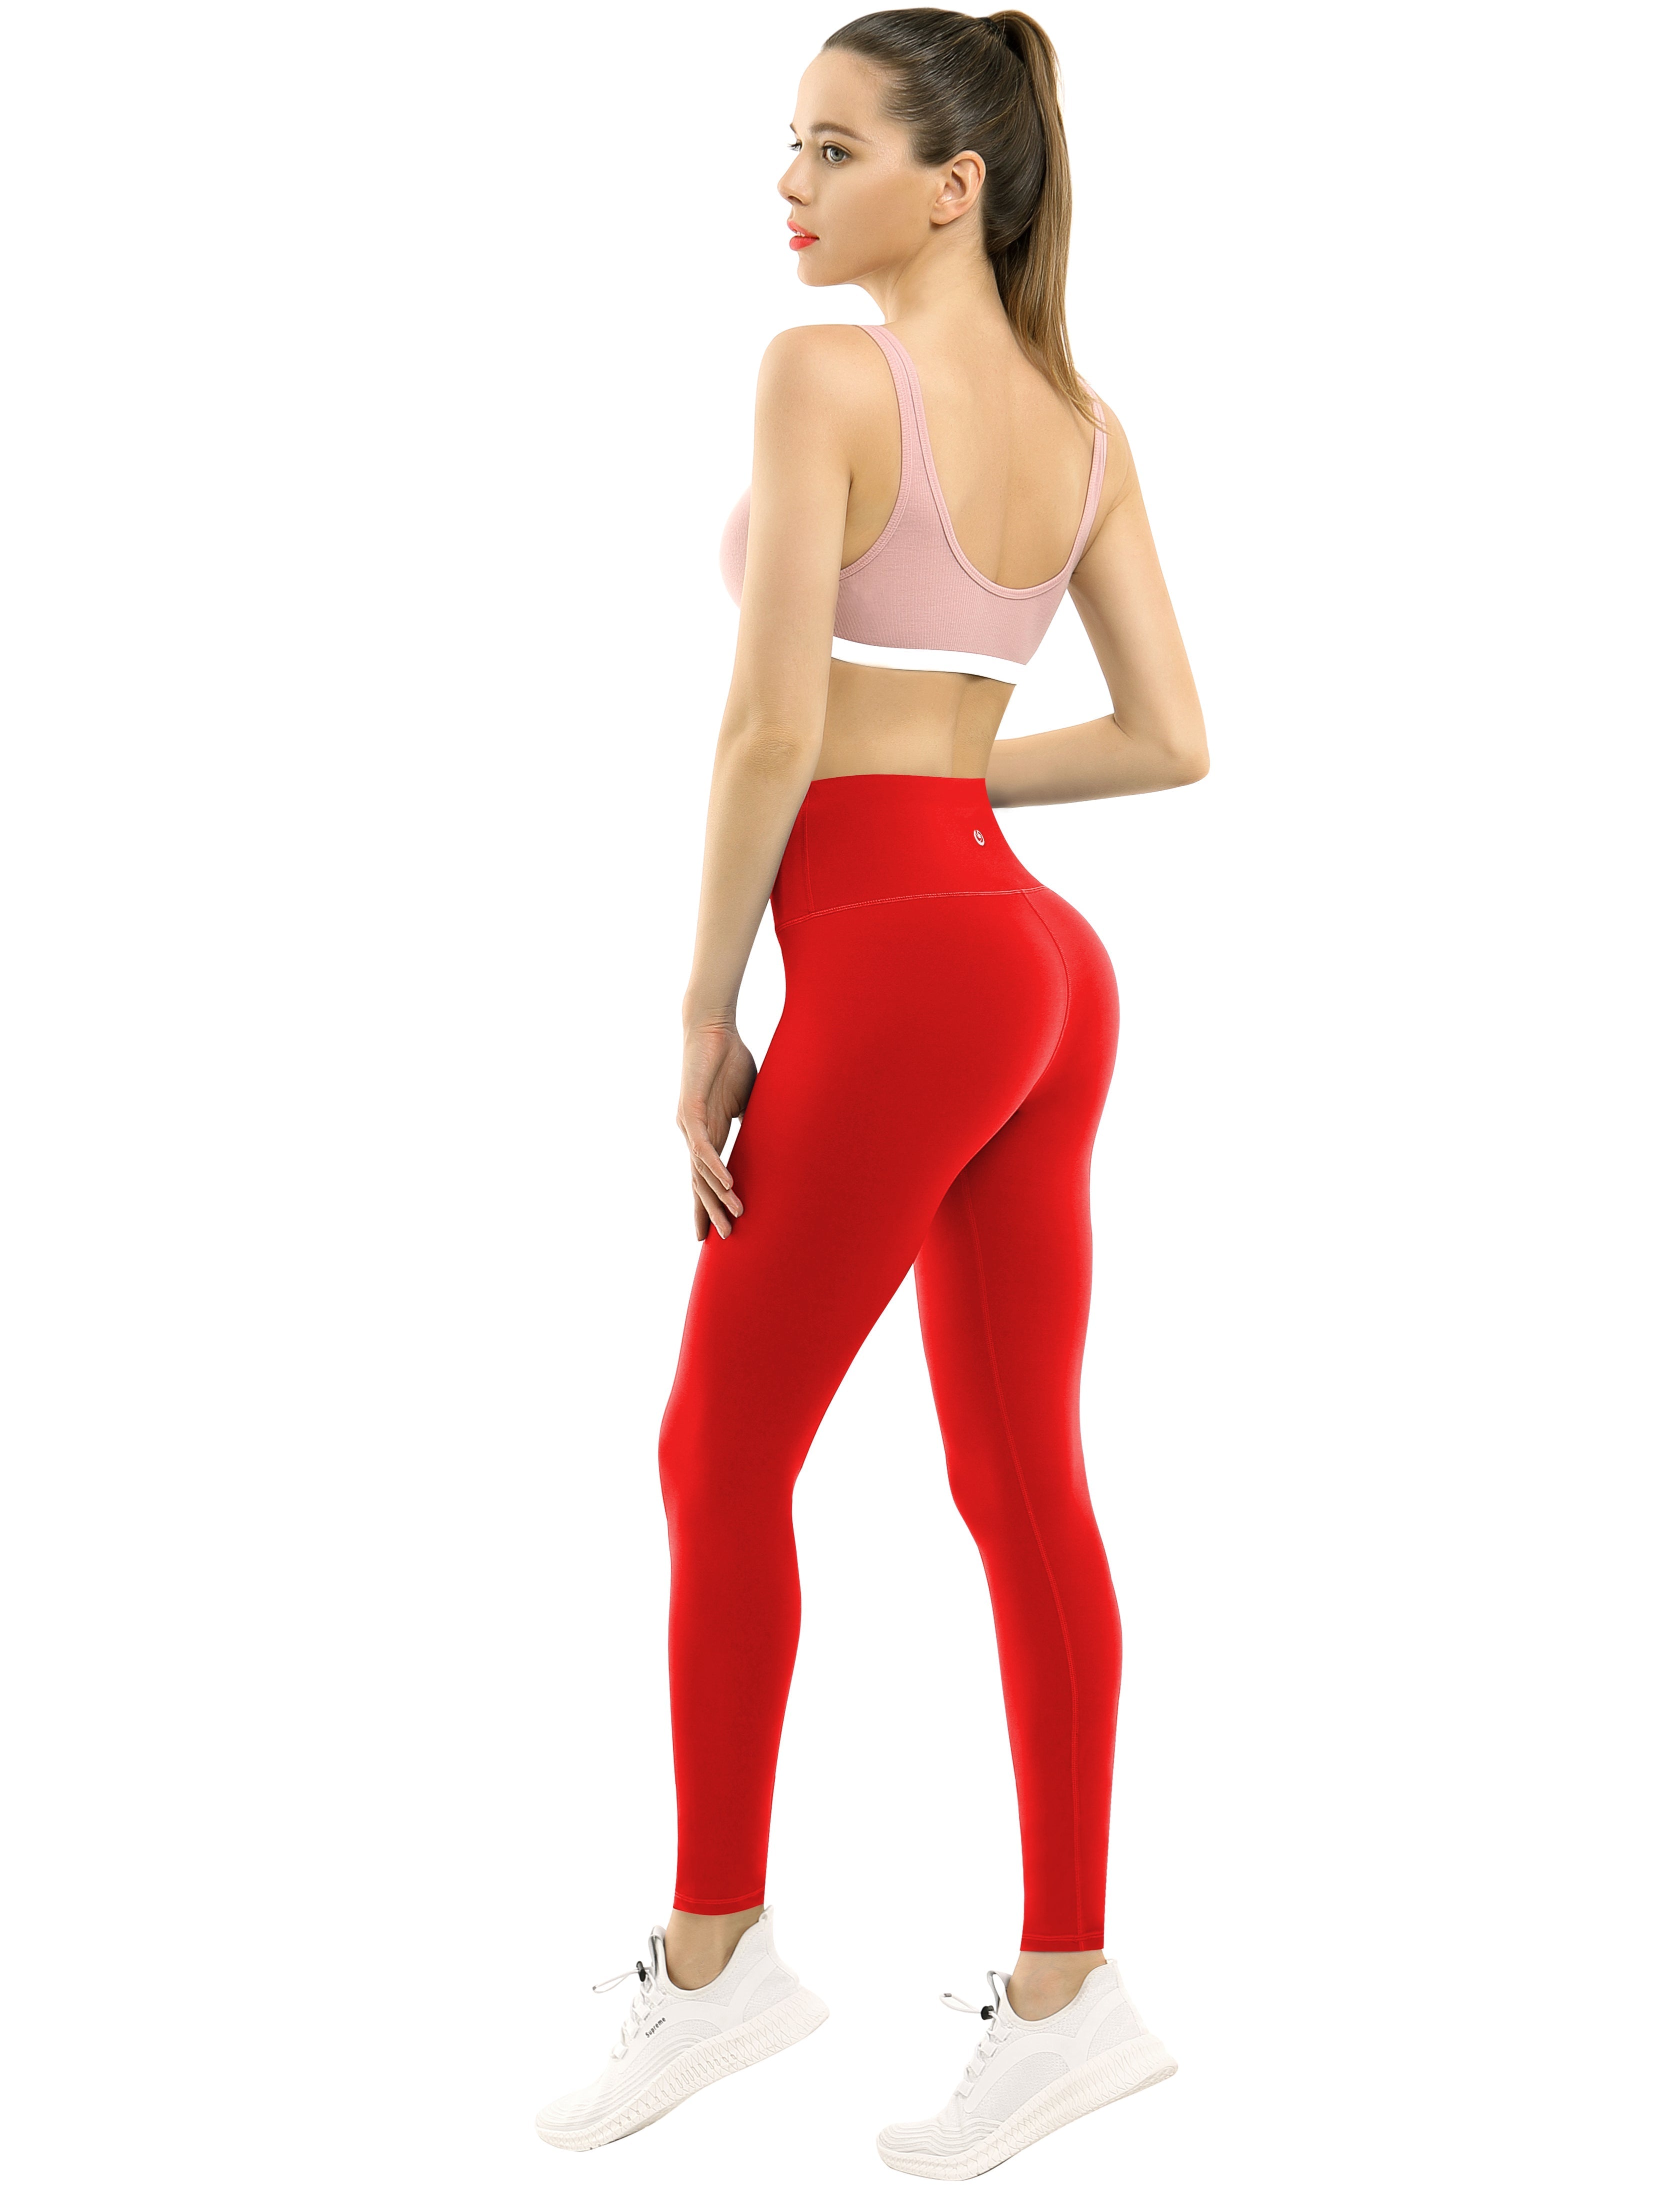 High Waist yogastudio Pants scarlet 75%Nylon/25%Spandex Fabric doesn't attract lint easily 4-way stretch No see-through Moisture-wicking Tummy control Inner pocket Four lengths